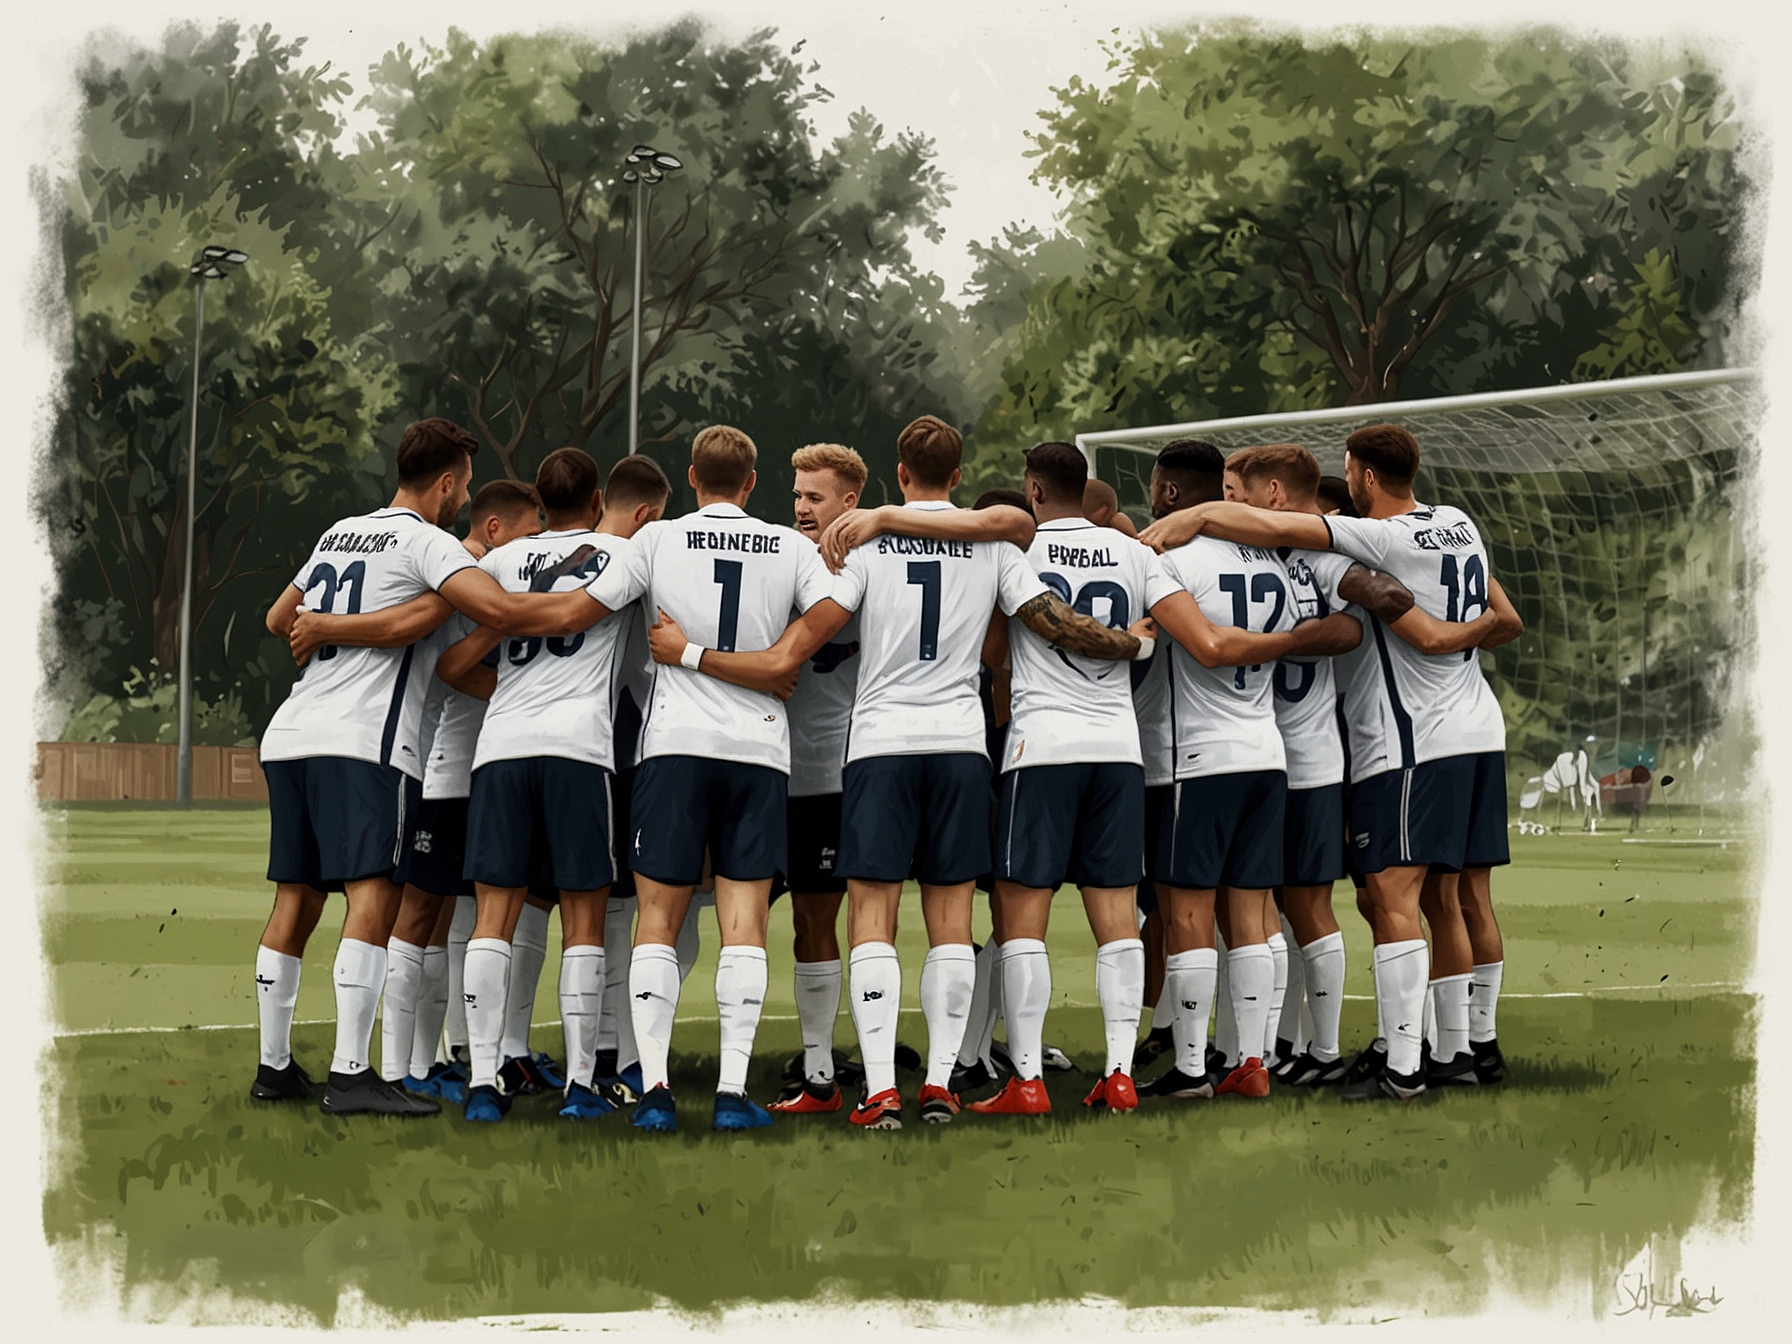 The England national football team gathered in a huddle at their training camp, surrounded by lush greenery, as they prepare intensively for their upcoming Euro 2024 matches.